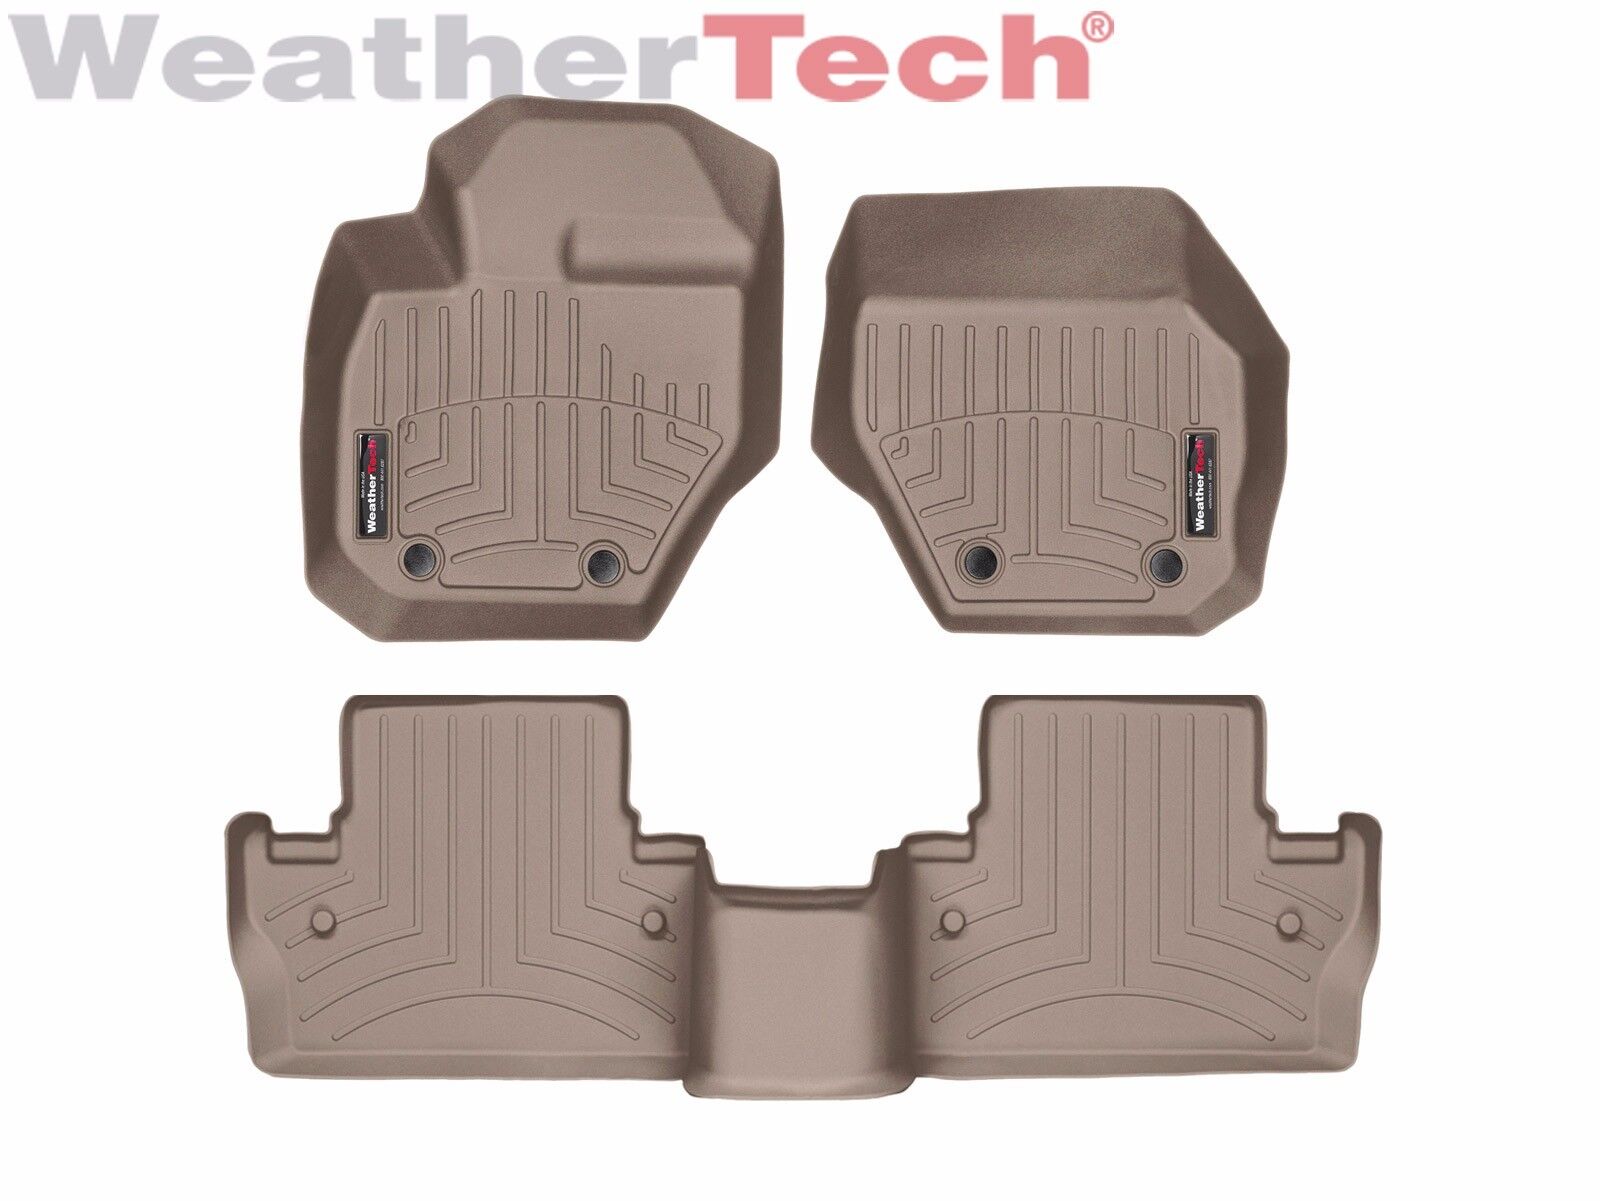 WeatherTech FloorLiner for Volvo S60/V60/Cross Country 1st & 2nd Row - Tan